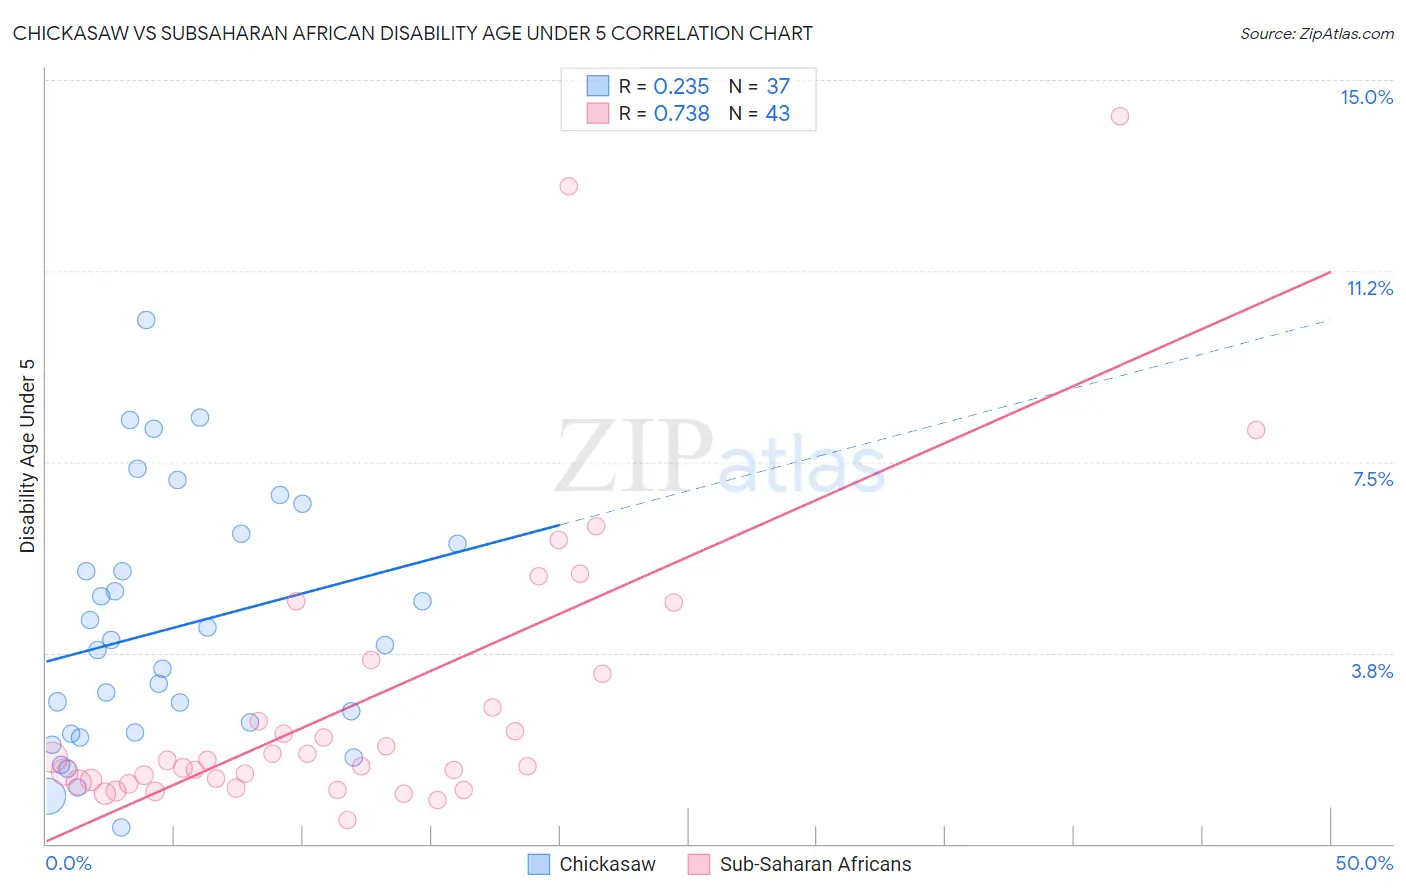 Chickasaw vs Subsaharan African Disability Age Under 5